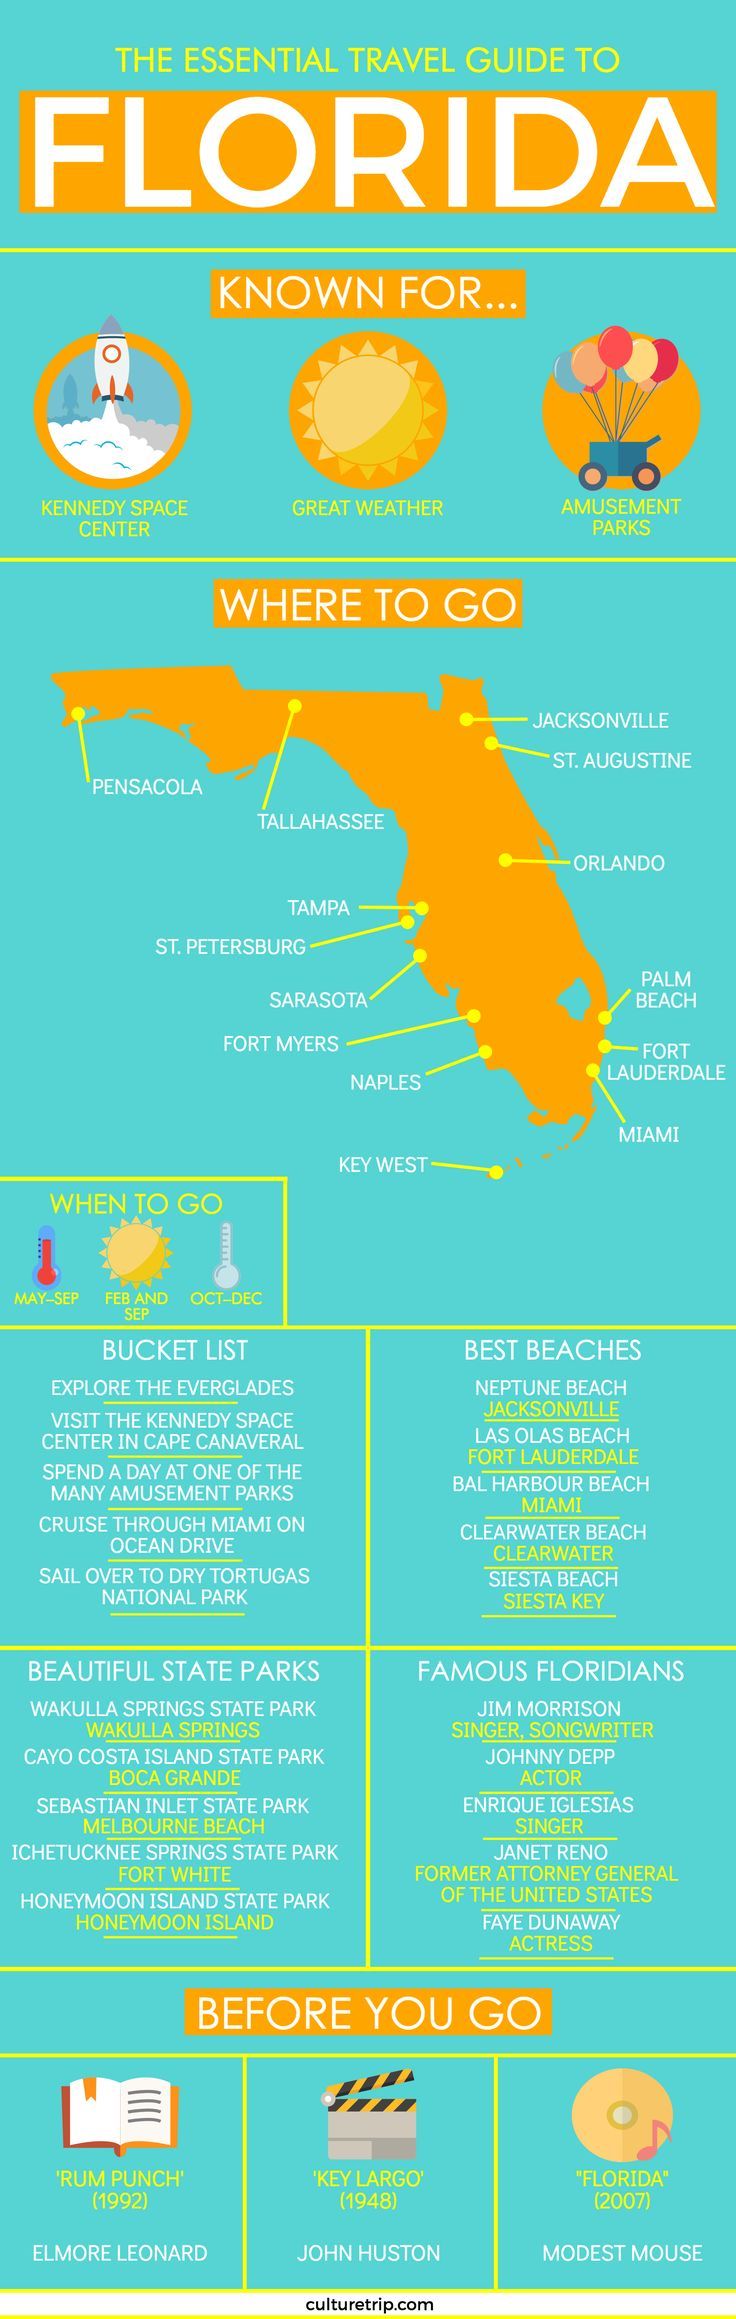 The Essential Travel Guide to Florida (Infographic)